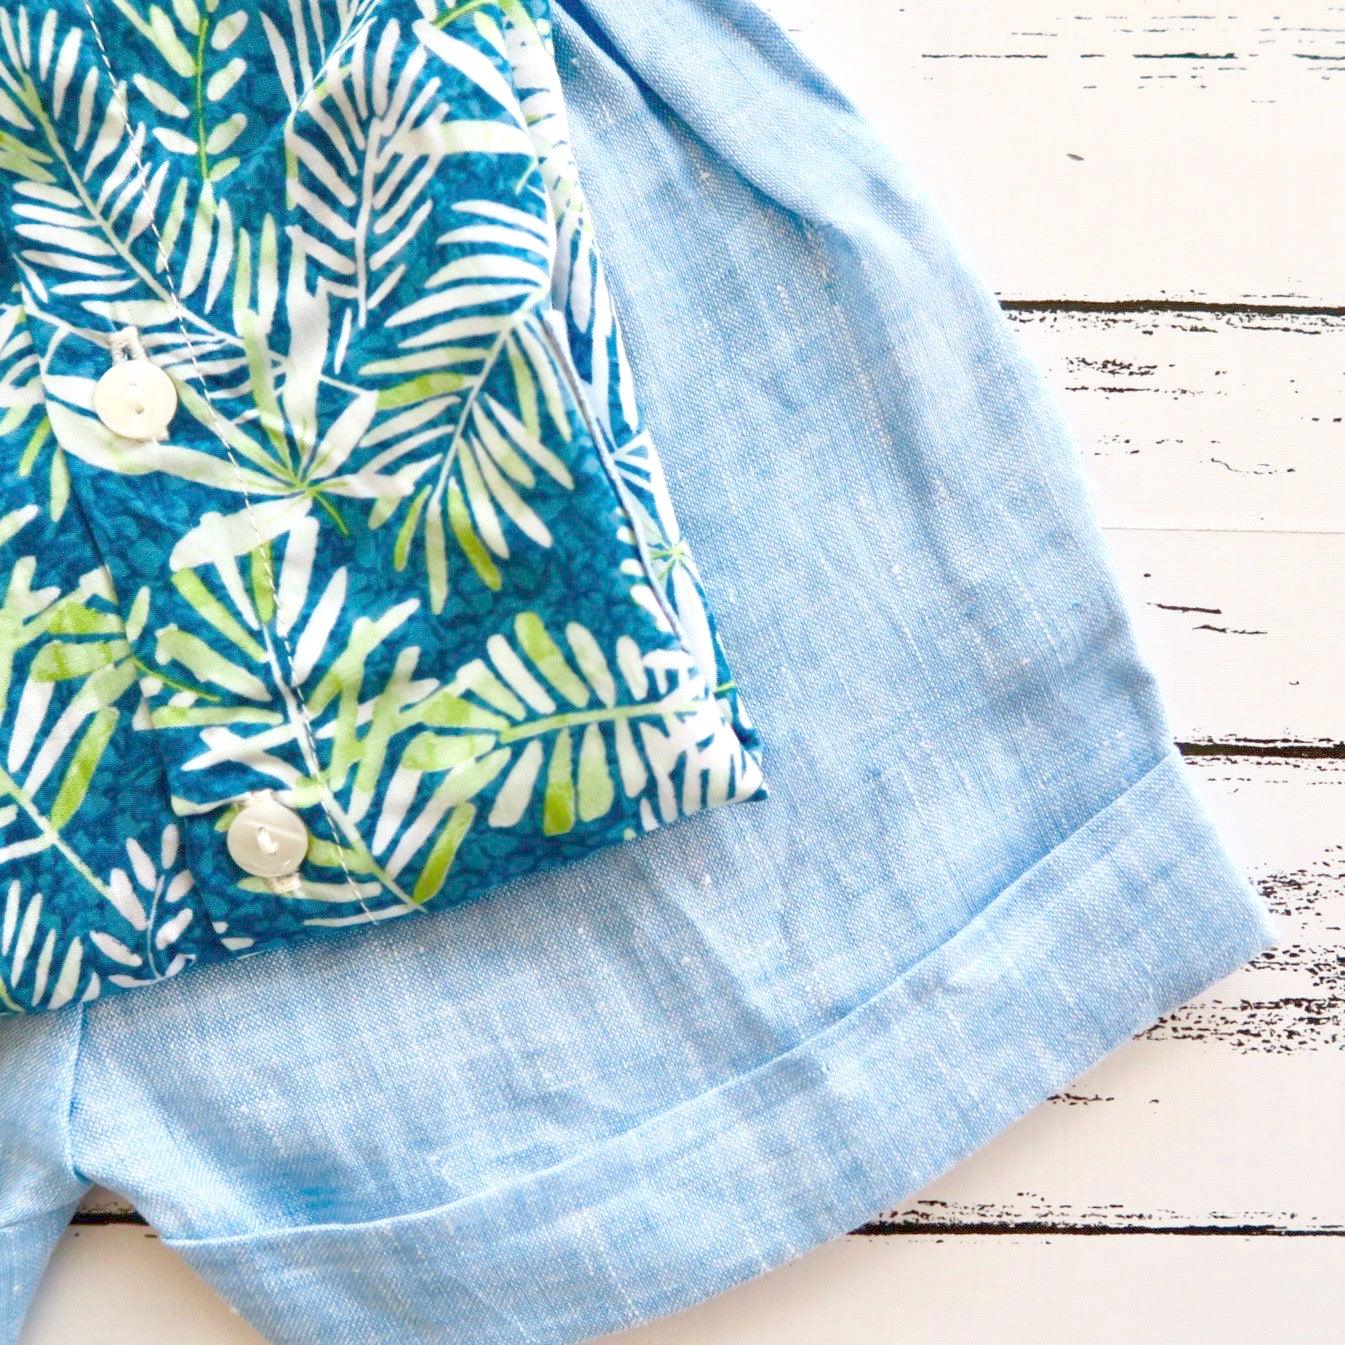 Cedar Top & Shorts in Aloha Leaves Blue and Blue Linen